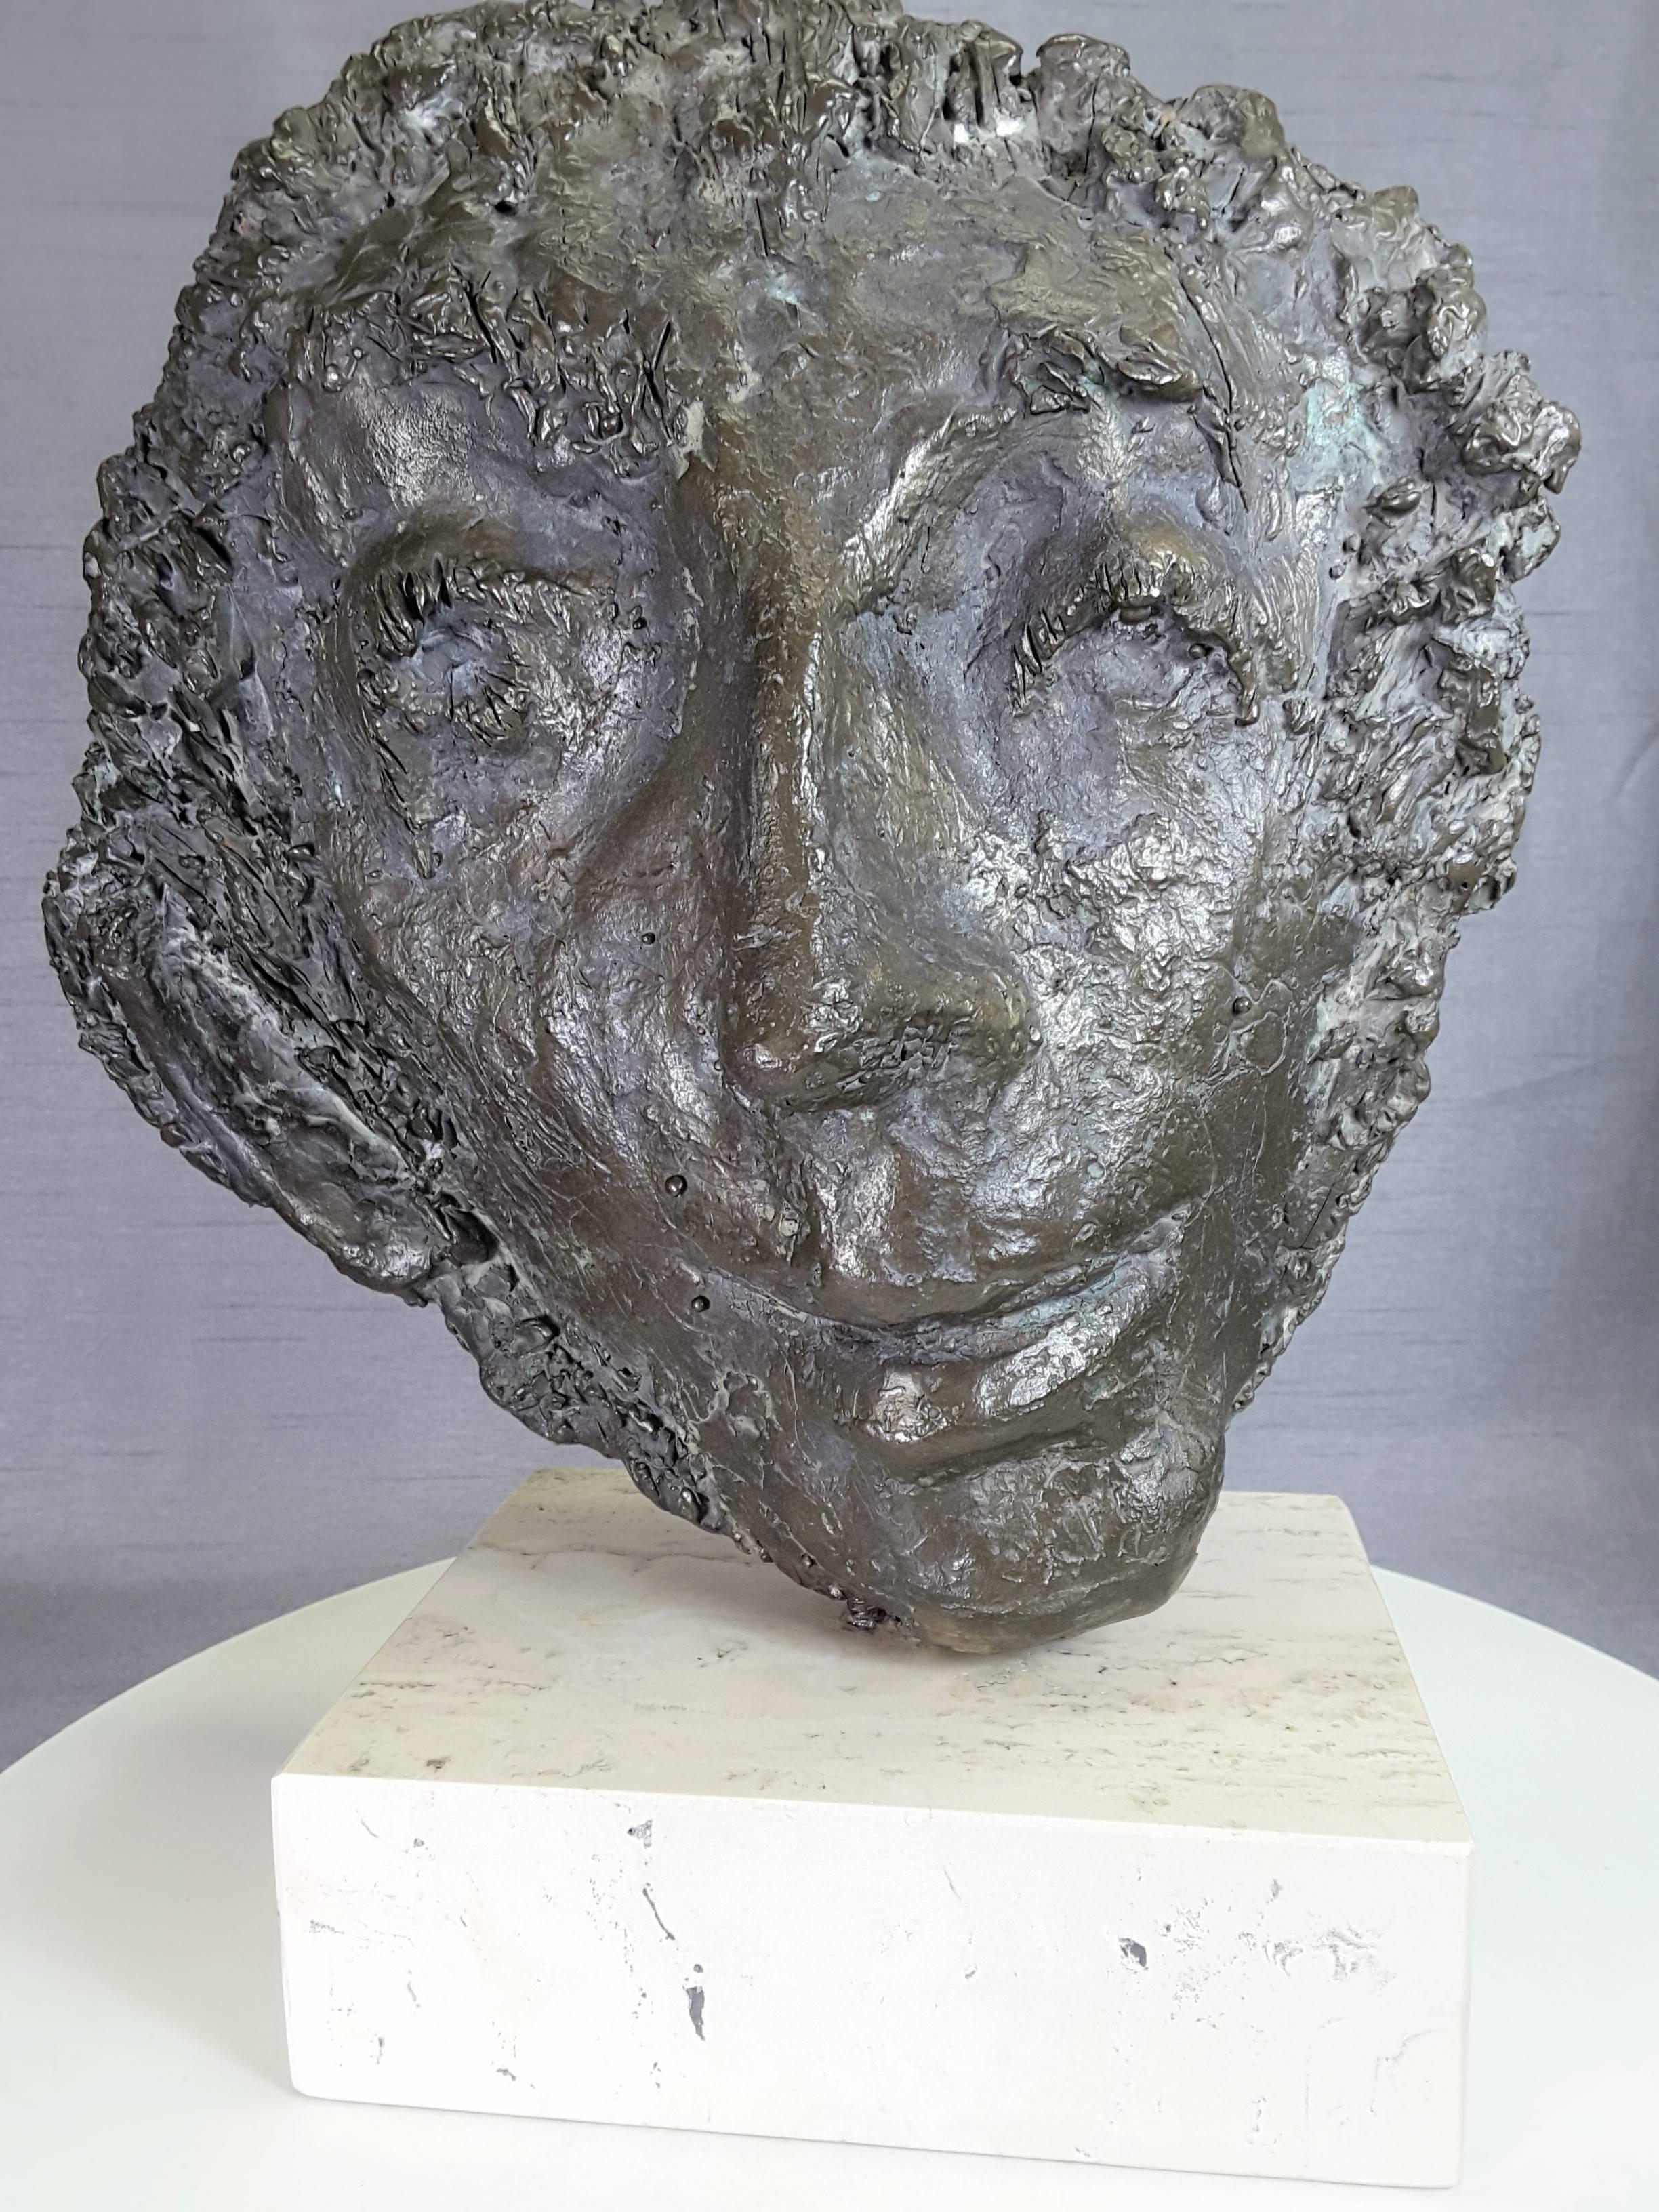 A large face bronze sculpture by Almuth Lutkenhaus (1930-1996), modern style face figure, mounted on a white marble square base. Very modern in style face with hair showing around the face. The head/face measures 15"-inches high x 12